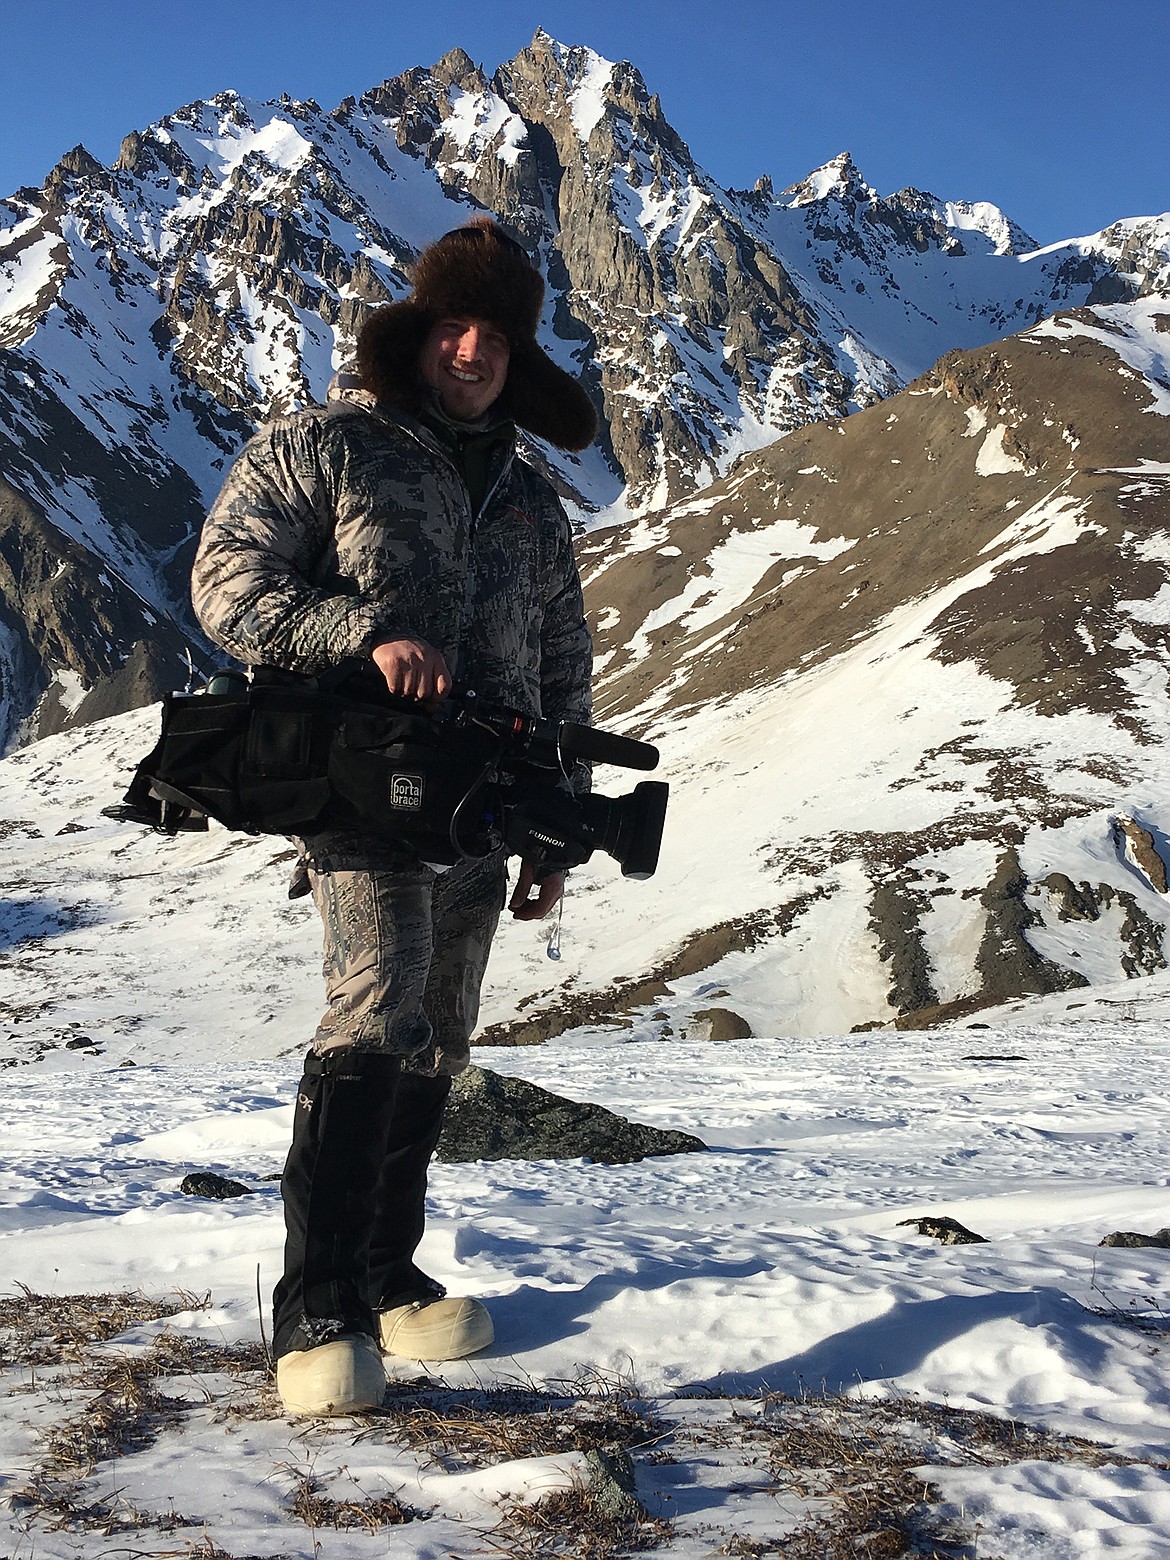 Mason Gertz has traveled the world working as a cameraman and field producer, including spending time in the Alaskan wilderness filming "Mountain Men." (courtesy photo)